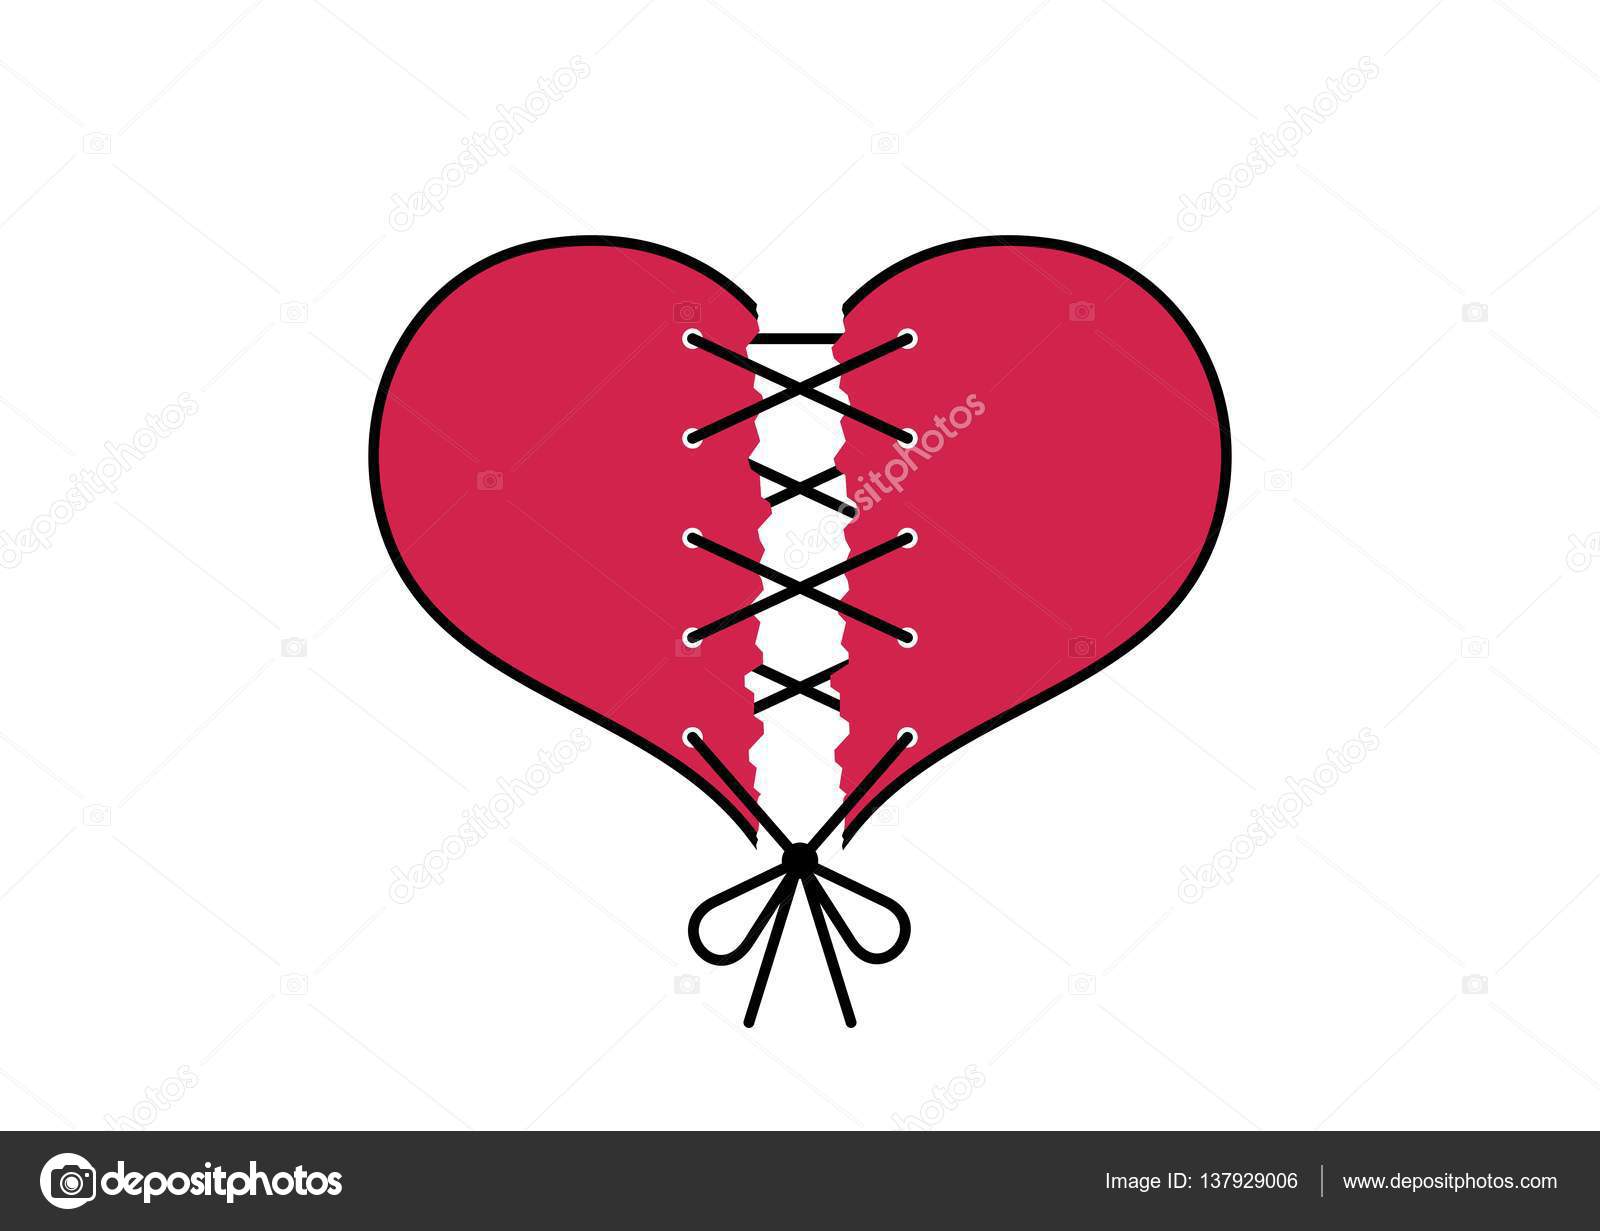 Broken heart sewn with thread - vector card for Valentine's Day ...